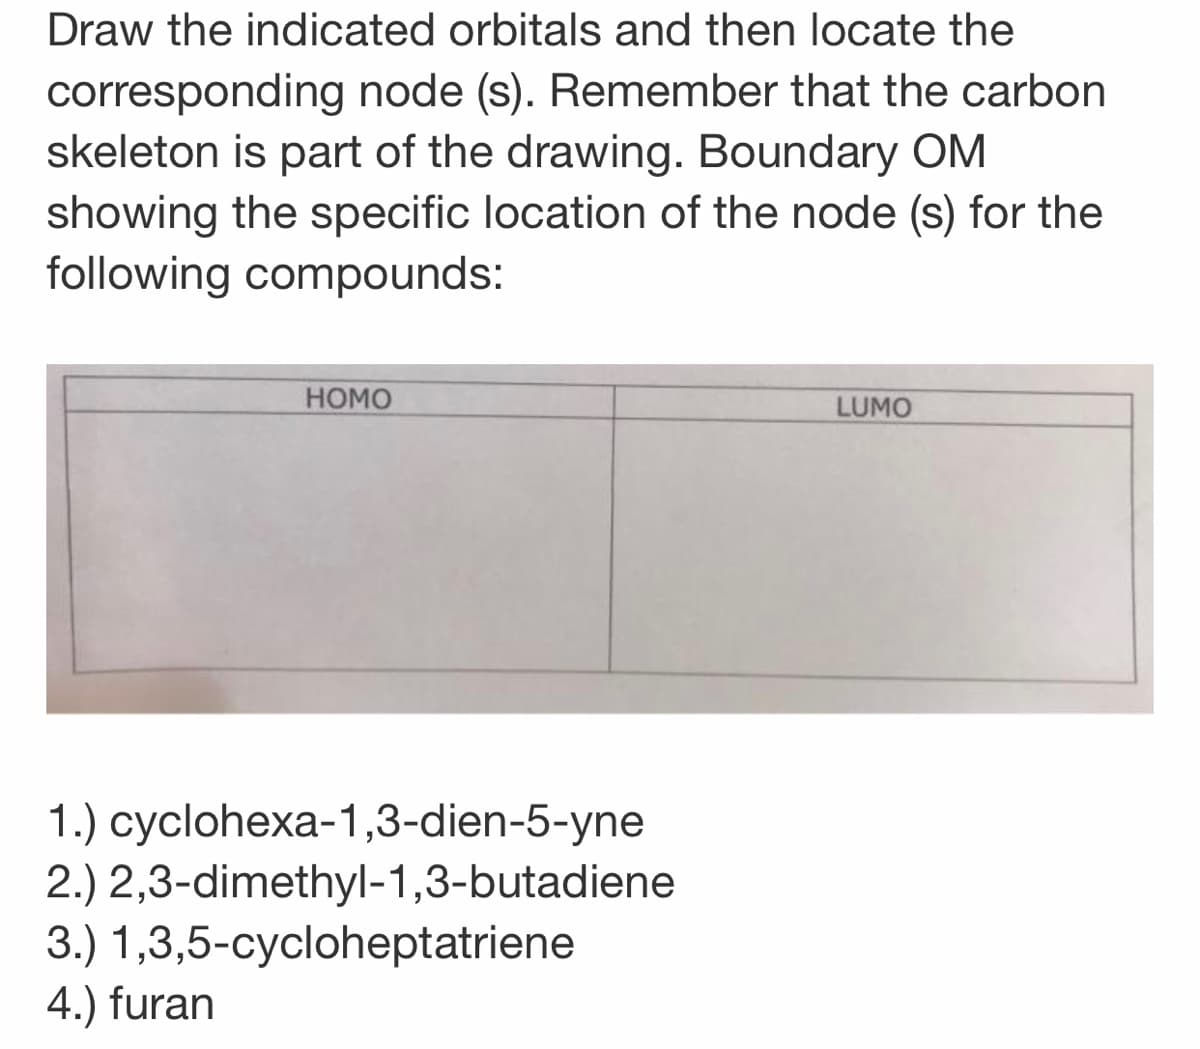 Draw the indicated orbitals and then locate the
corresponding node (s). Remember that the carbon
skeleton is part of the drawing. Boundary OM
showing the specific location of the node (s) for the
following compounds:
НОМО
LUMO
1.) суclohexa-1,3-dien-5-yne
2.) 2,3-dimethyl-1,3-butadiene
3.) 1,3,5-cycloheptatriene
4.) furan
